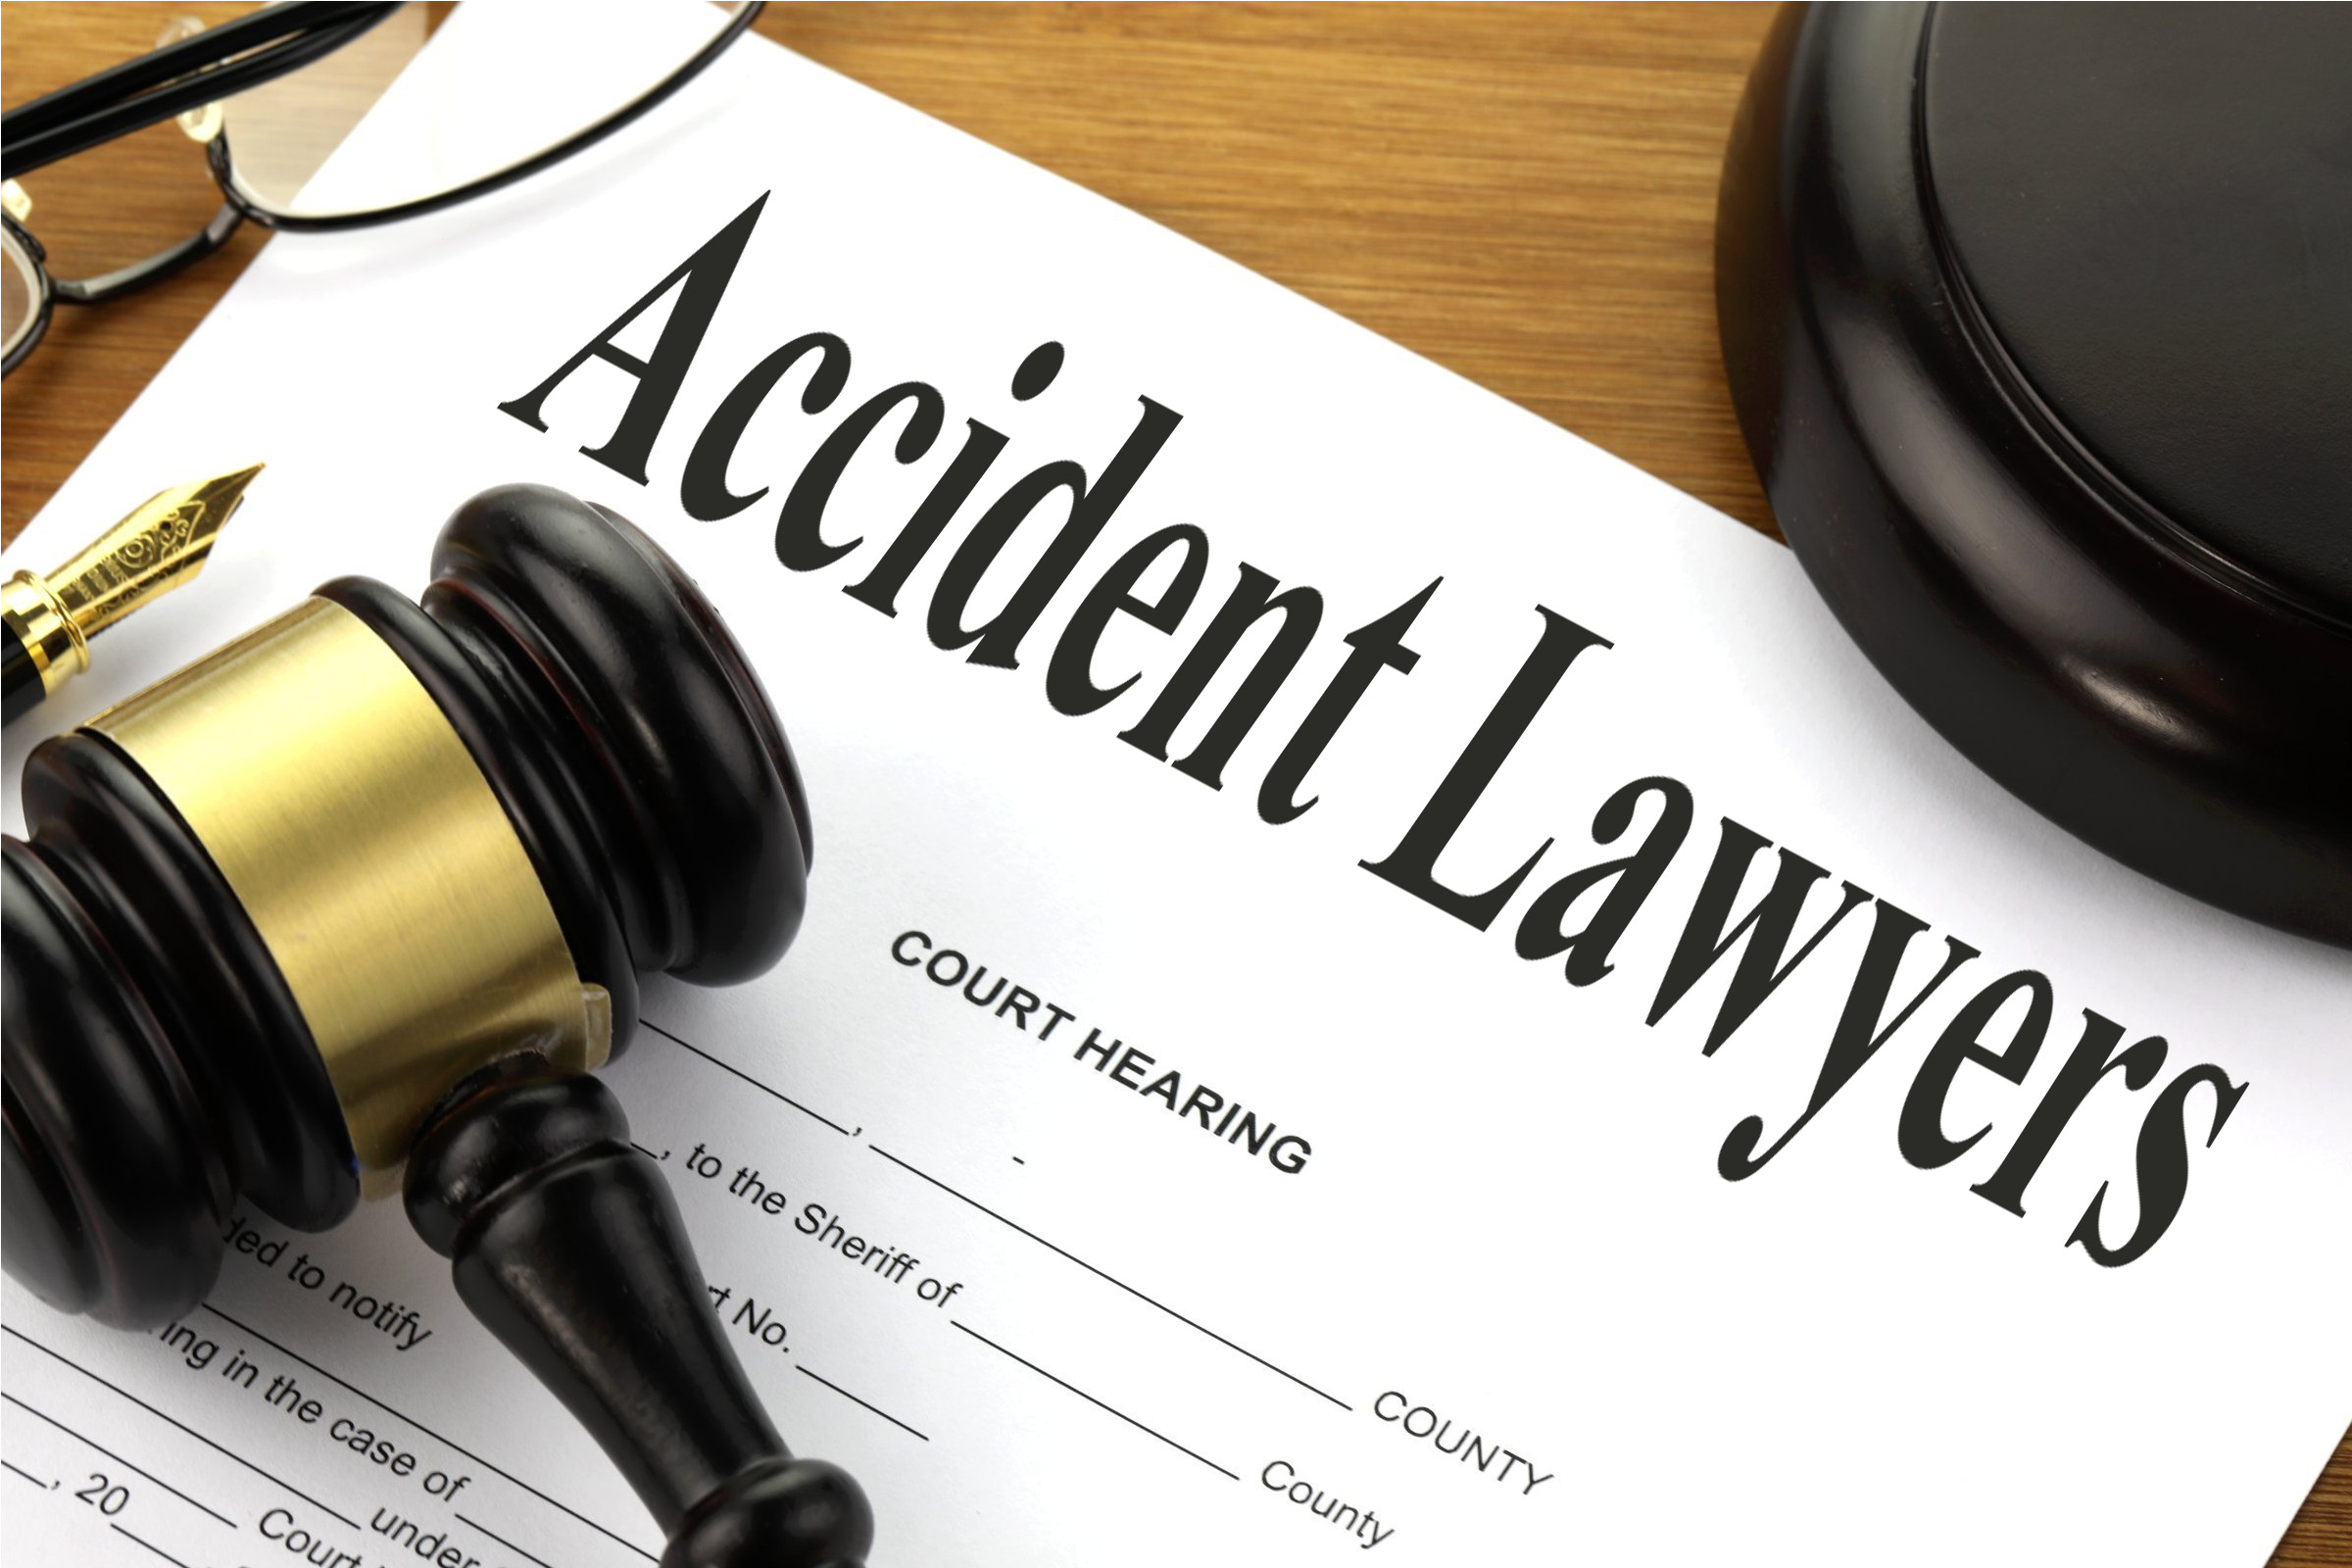 Accident Lawyers - Free of Charge Creative Commons Legal 1 image